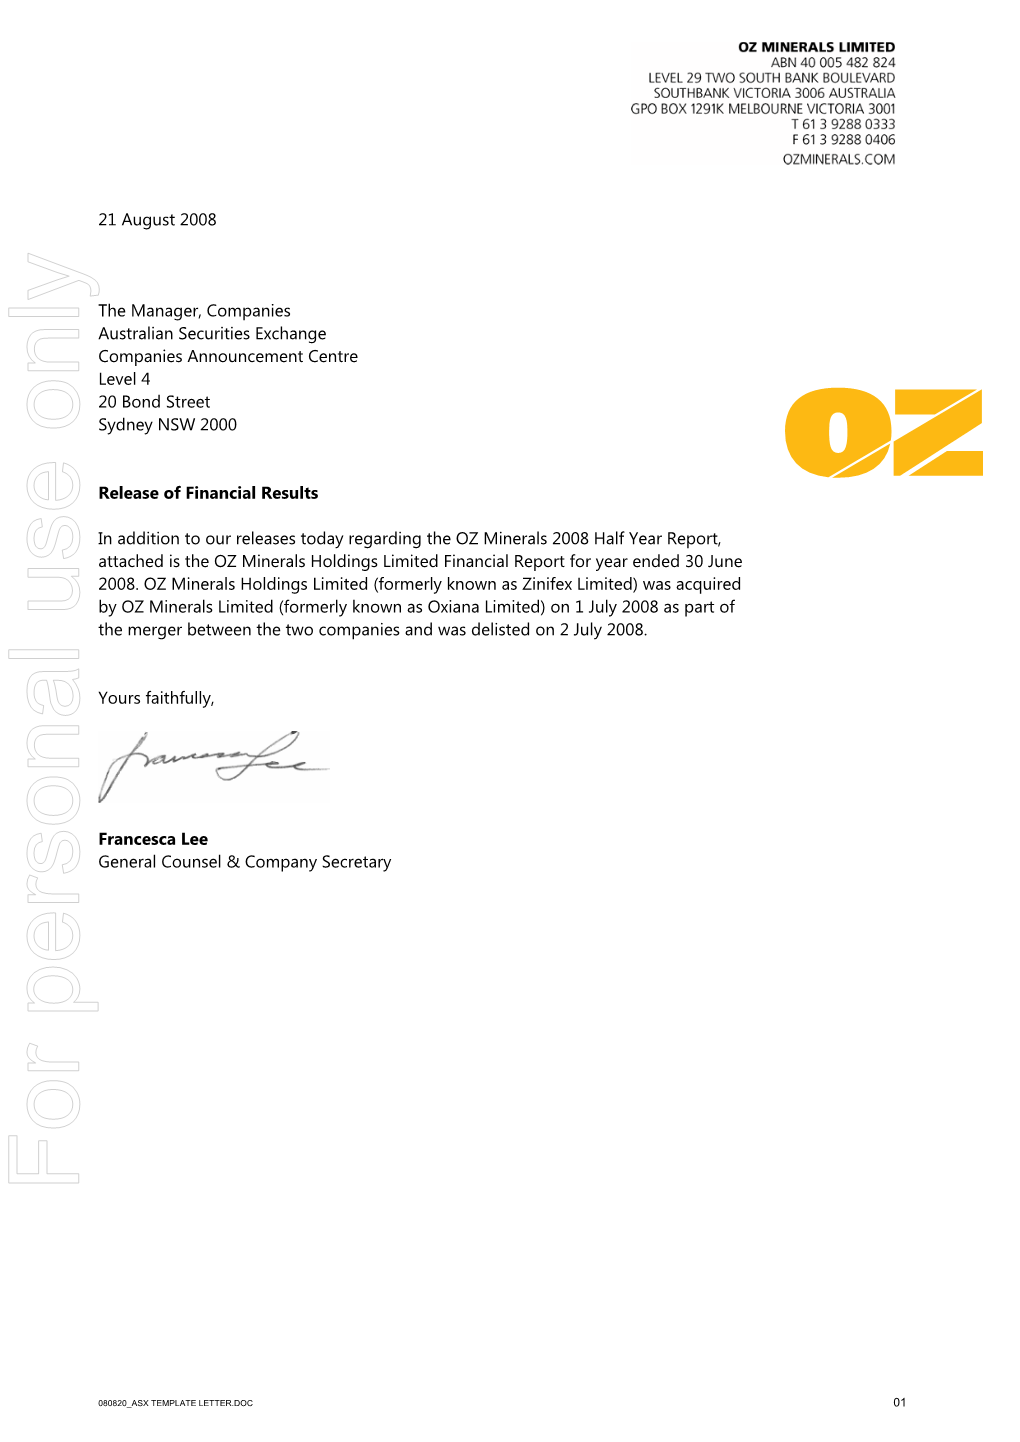 OZ Minerals Holdings Limited Financial Report for Year Ended 30 June 2008